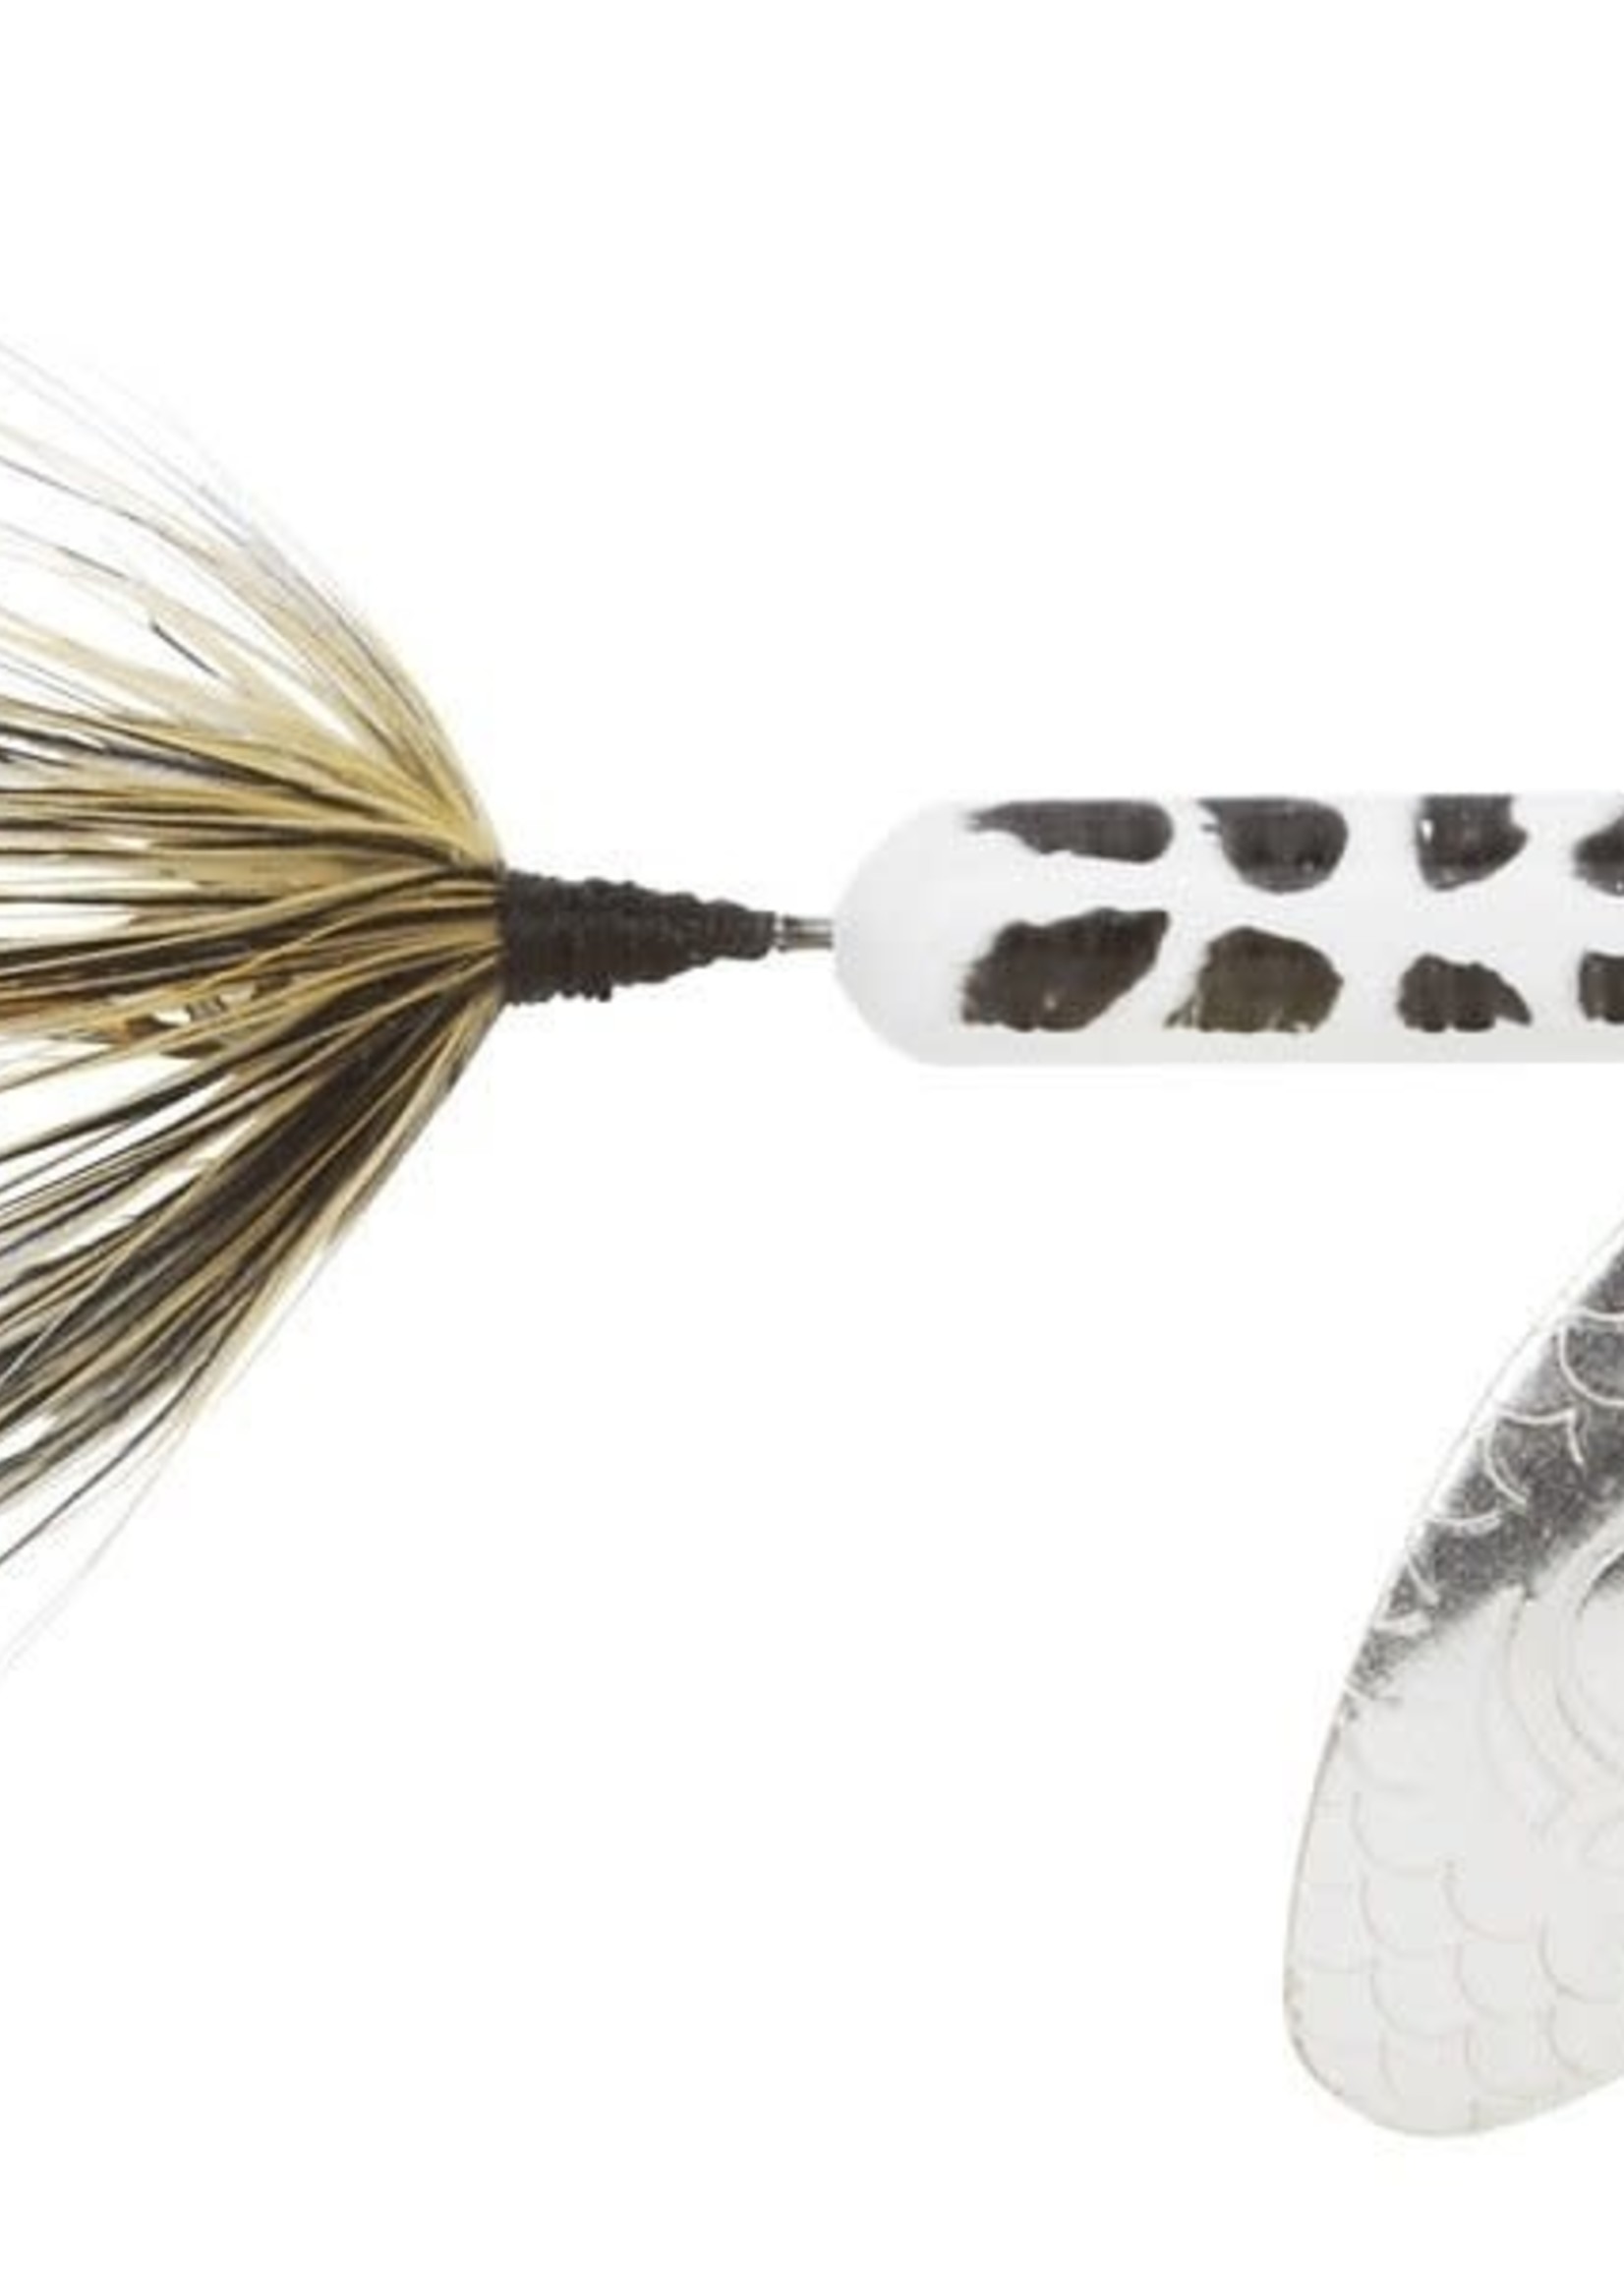 Worden's Rooster Tail Spinner Lure 1/16 Oz. - White Coachdog